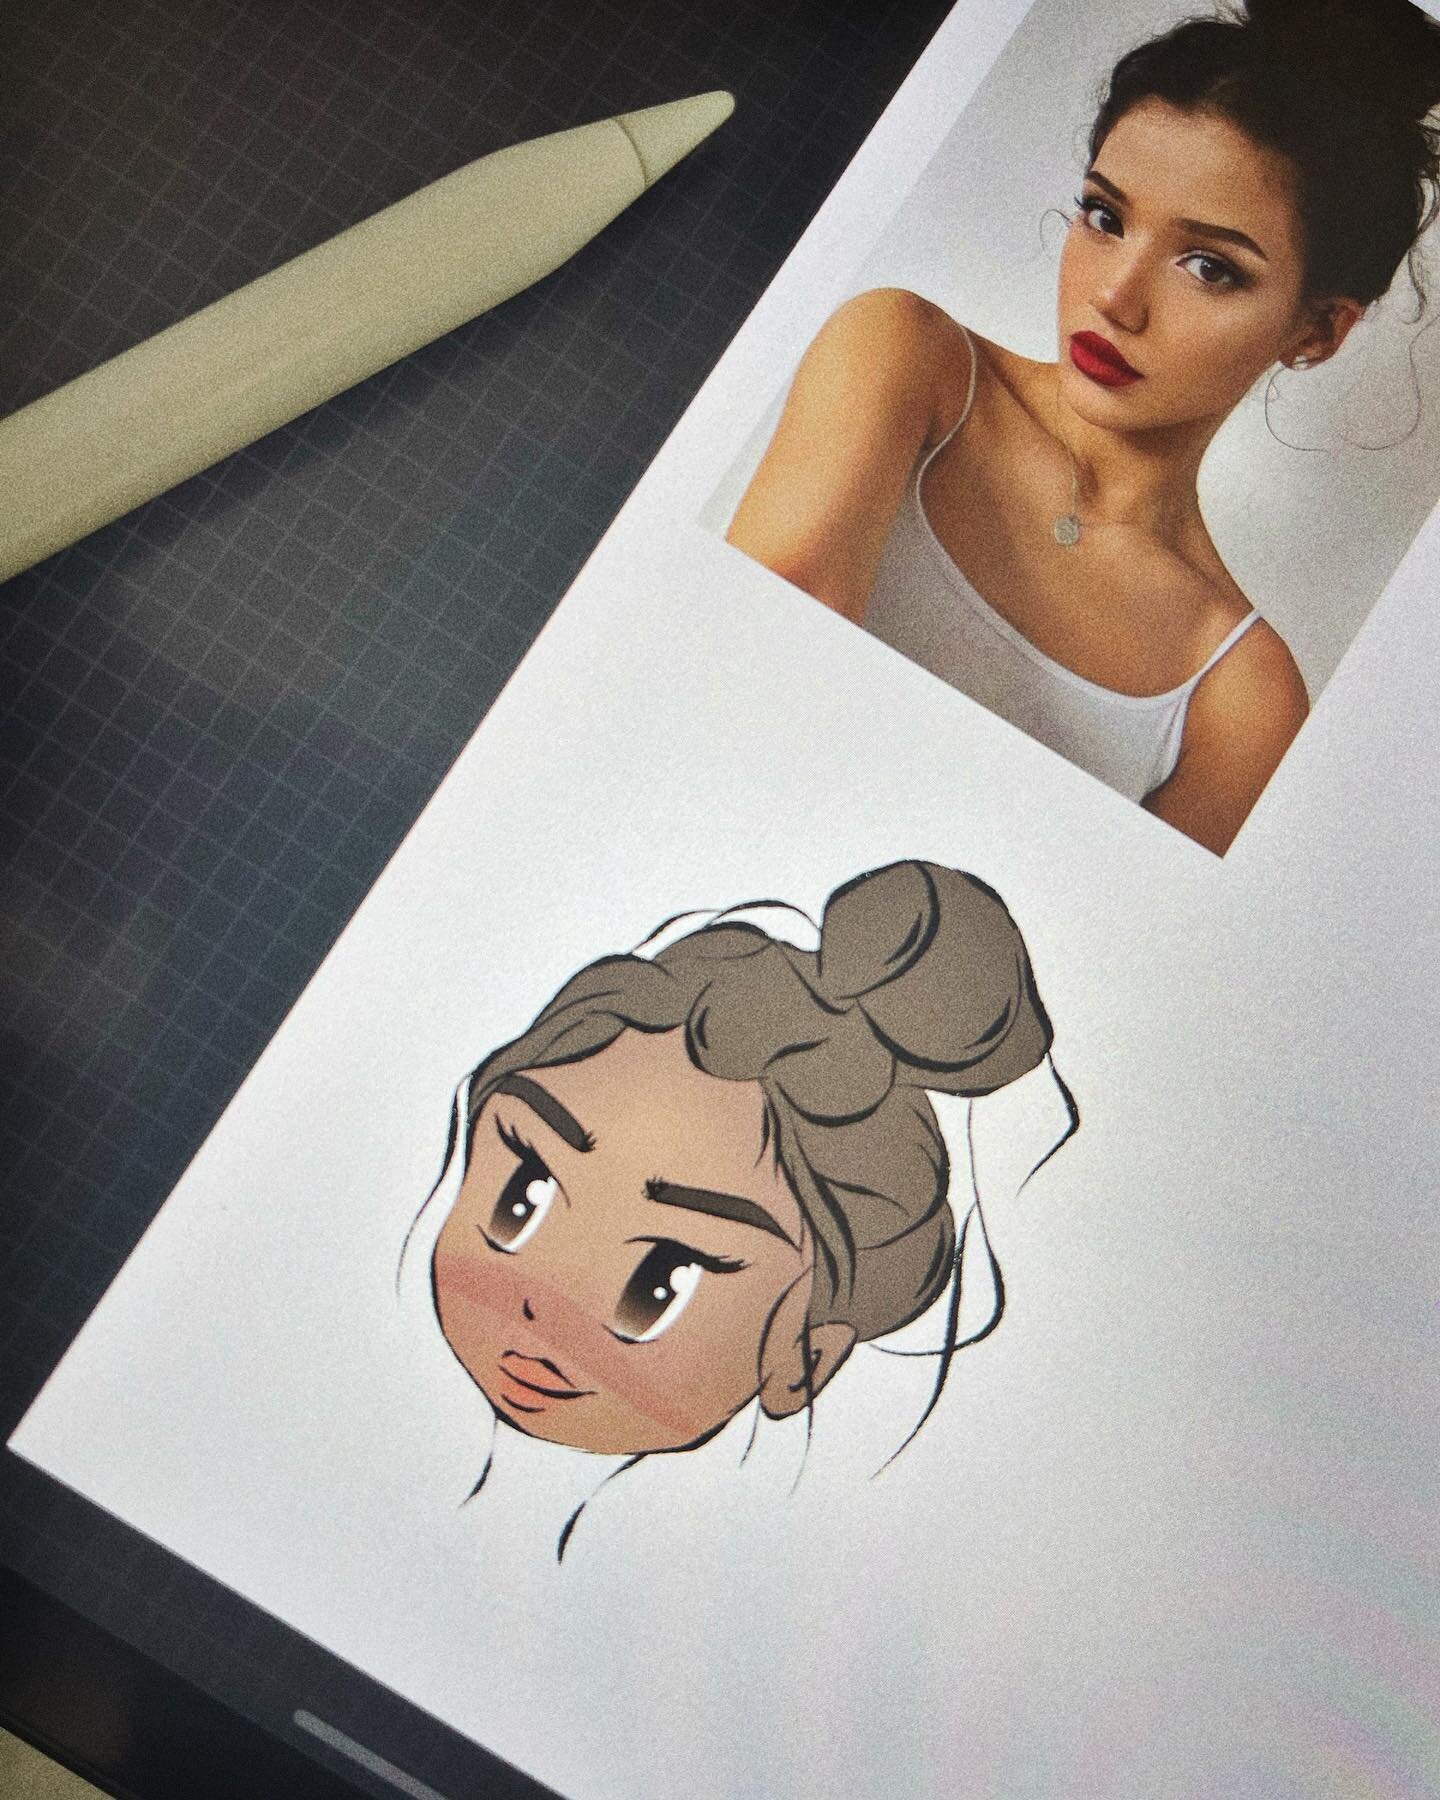 So crazy to see where I started and where I am now with my drawing style!

This first photo is from YEARS ago when I was learning to draw digitally just for fun 😂☺️

The second is my beautiful client from 2 days ago! 🥰

I seriously appreciate my cl